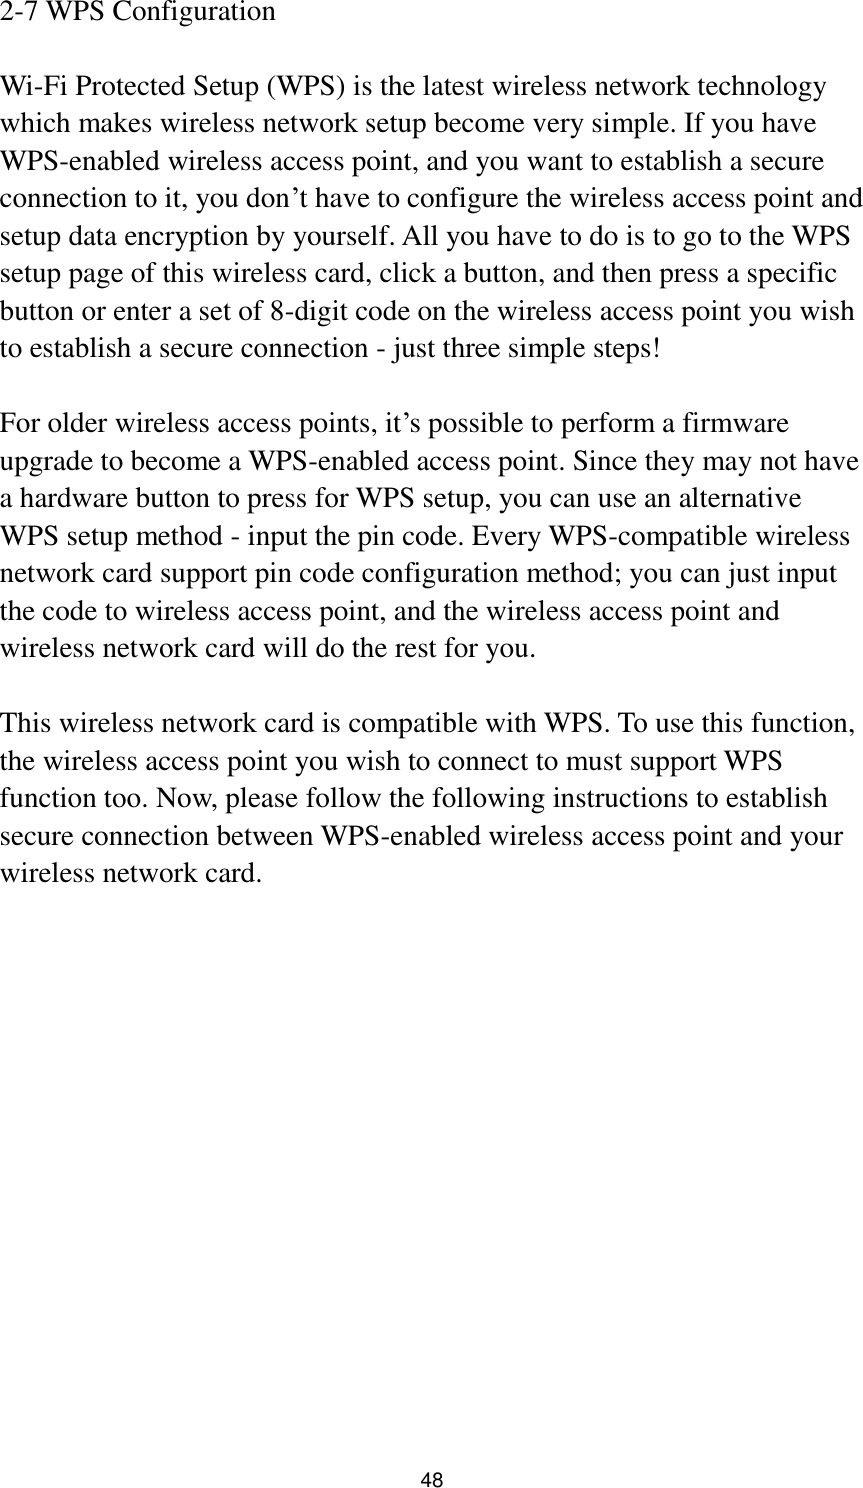  48 2-7 WPS Configuration  Wi-Fi Protected Setup (WPS) is the latest wireless network technology which makes wireless network setup become very simple. If you have WPS-enabled wireless access point, and you want to establish a secure connection to it, you don‟t have to configure the wireless access point and setup data encryption by yourself. All you have to do is to go to the WPS setup page of this wireless card, click a button, and then press a specific button or enter a set of 8-digit code on the wireless access point you wish to establish a secure connection - just three simple steps!    For older wireless access points, it‟s possible to perform a firmware upgrade to become a WPS-enabled access point. Since they may not have a hardware button to press for WPS setup, you can use an alternative WPS setup method - input the pin code. Every WPS-compatible wireless network card support pin code configuration method; you can just input the code to wireless access point, and the wireless access point and wireless network card will do the rest for you.  This wireless network card is compatible with WPS. To use this function, the wireless access point you wish to connect to must support WPS function too. Now, please follow the following instructions to establish secure connection between WPS-enabled wireless access point and your wireless network card. 